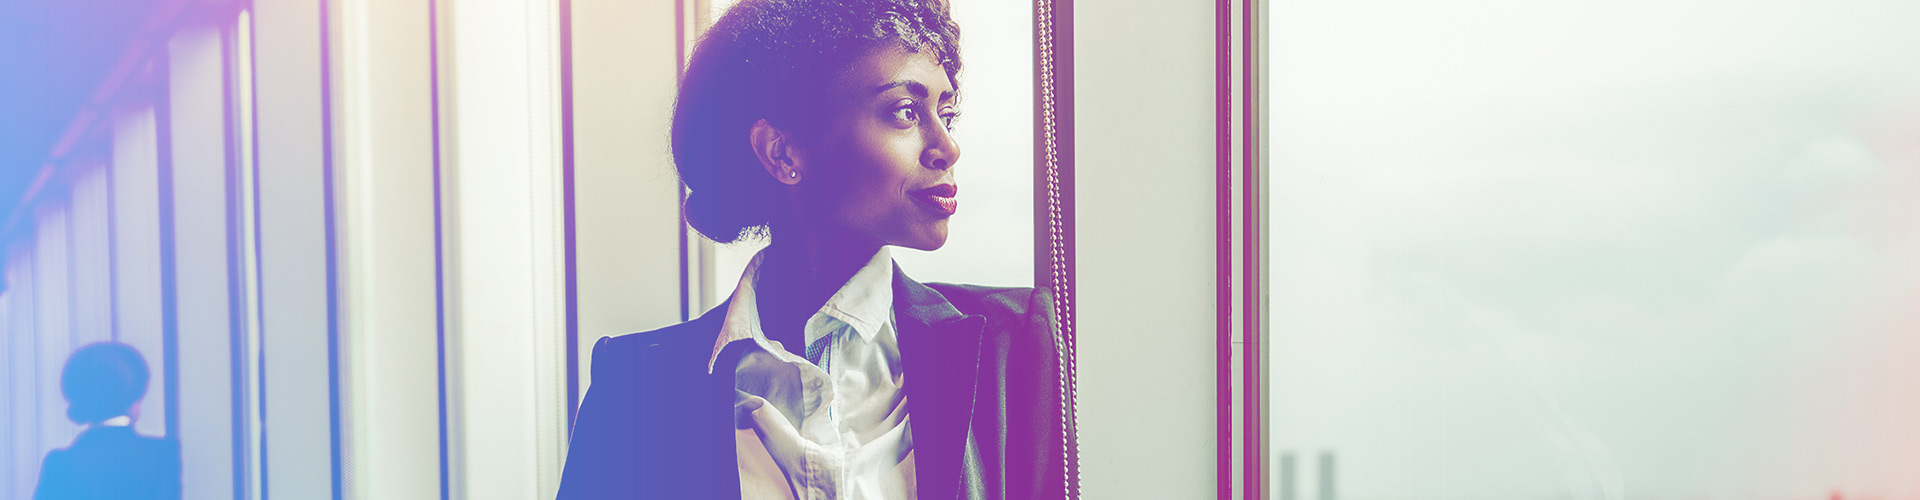 Developing African American Talent in our Industry blog banner featuring professional young black woman in an office hallway looking out a large window with a smile